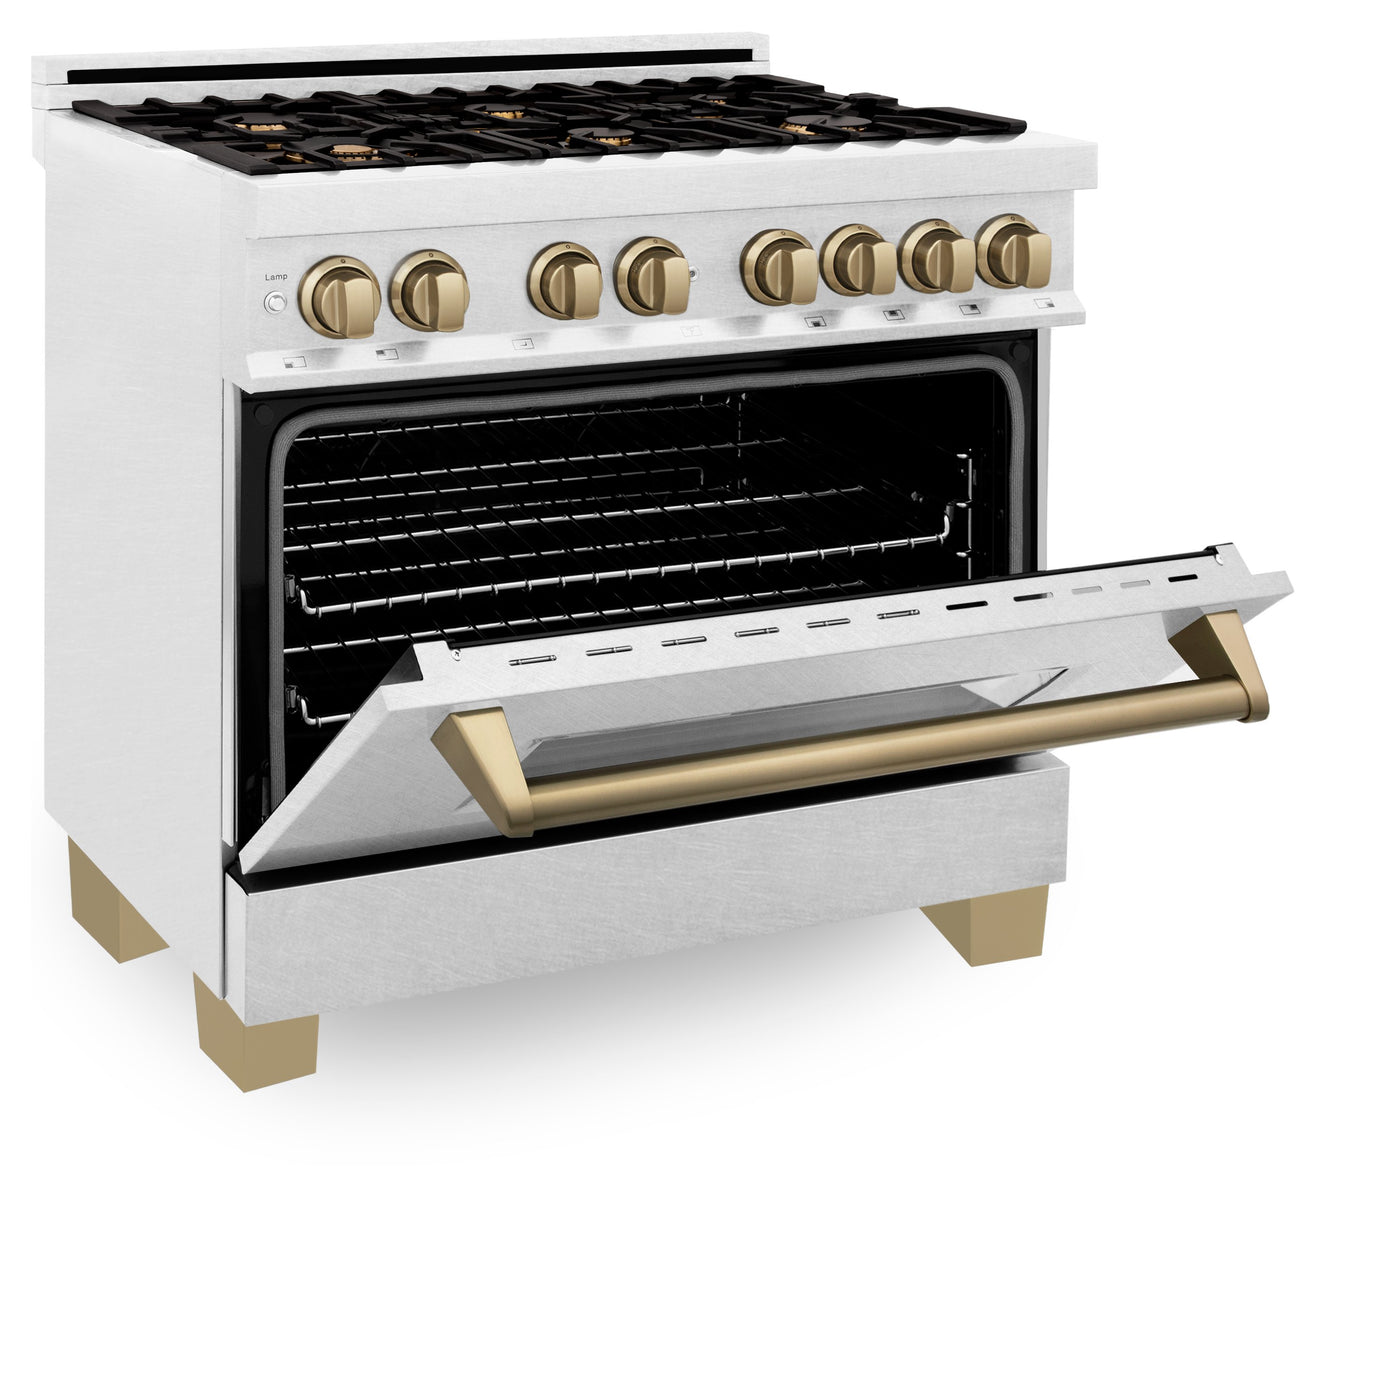 ZLINE Autograph Edition 36" 4.6 cu. ft. Dual Fuel Range with Gas Stove and Electric Oven in DuraSnow® Stainless Steel with Accents (RASZ-SN-36)